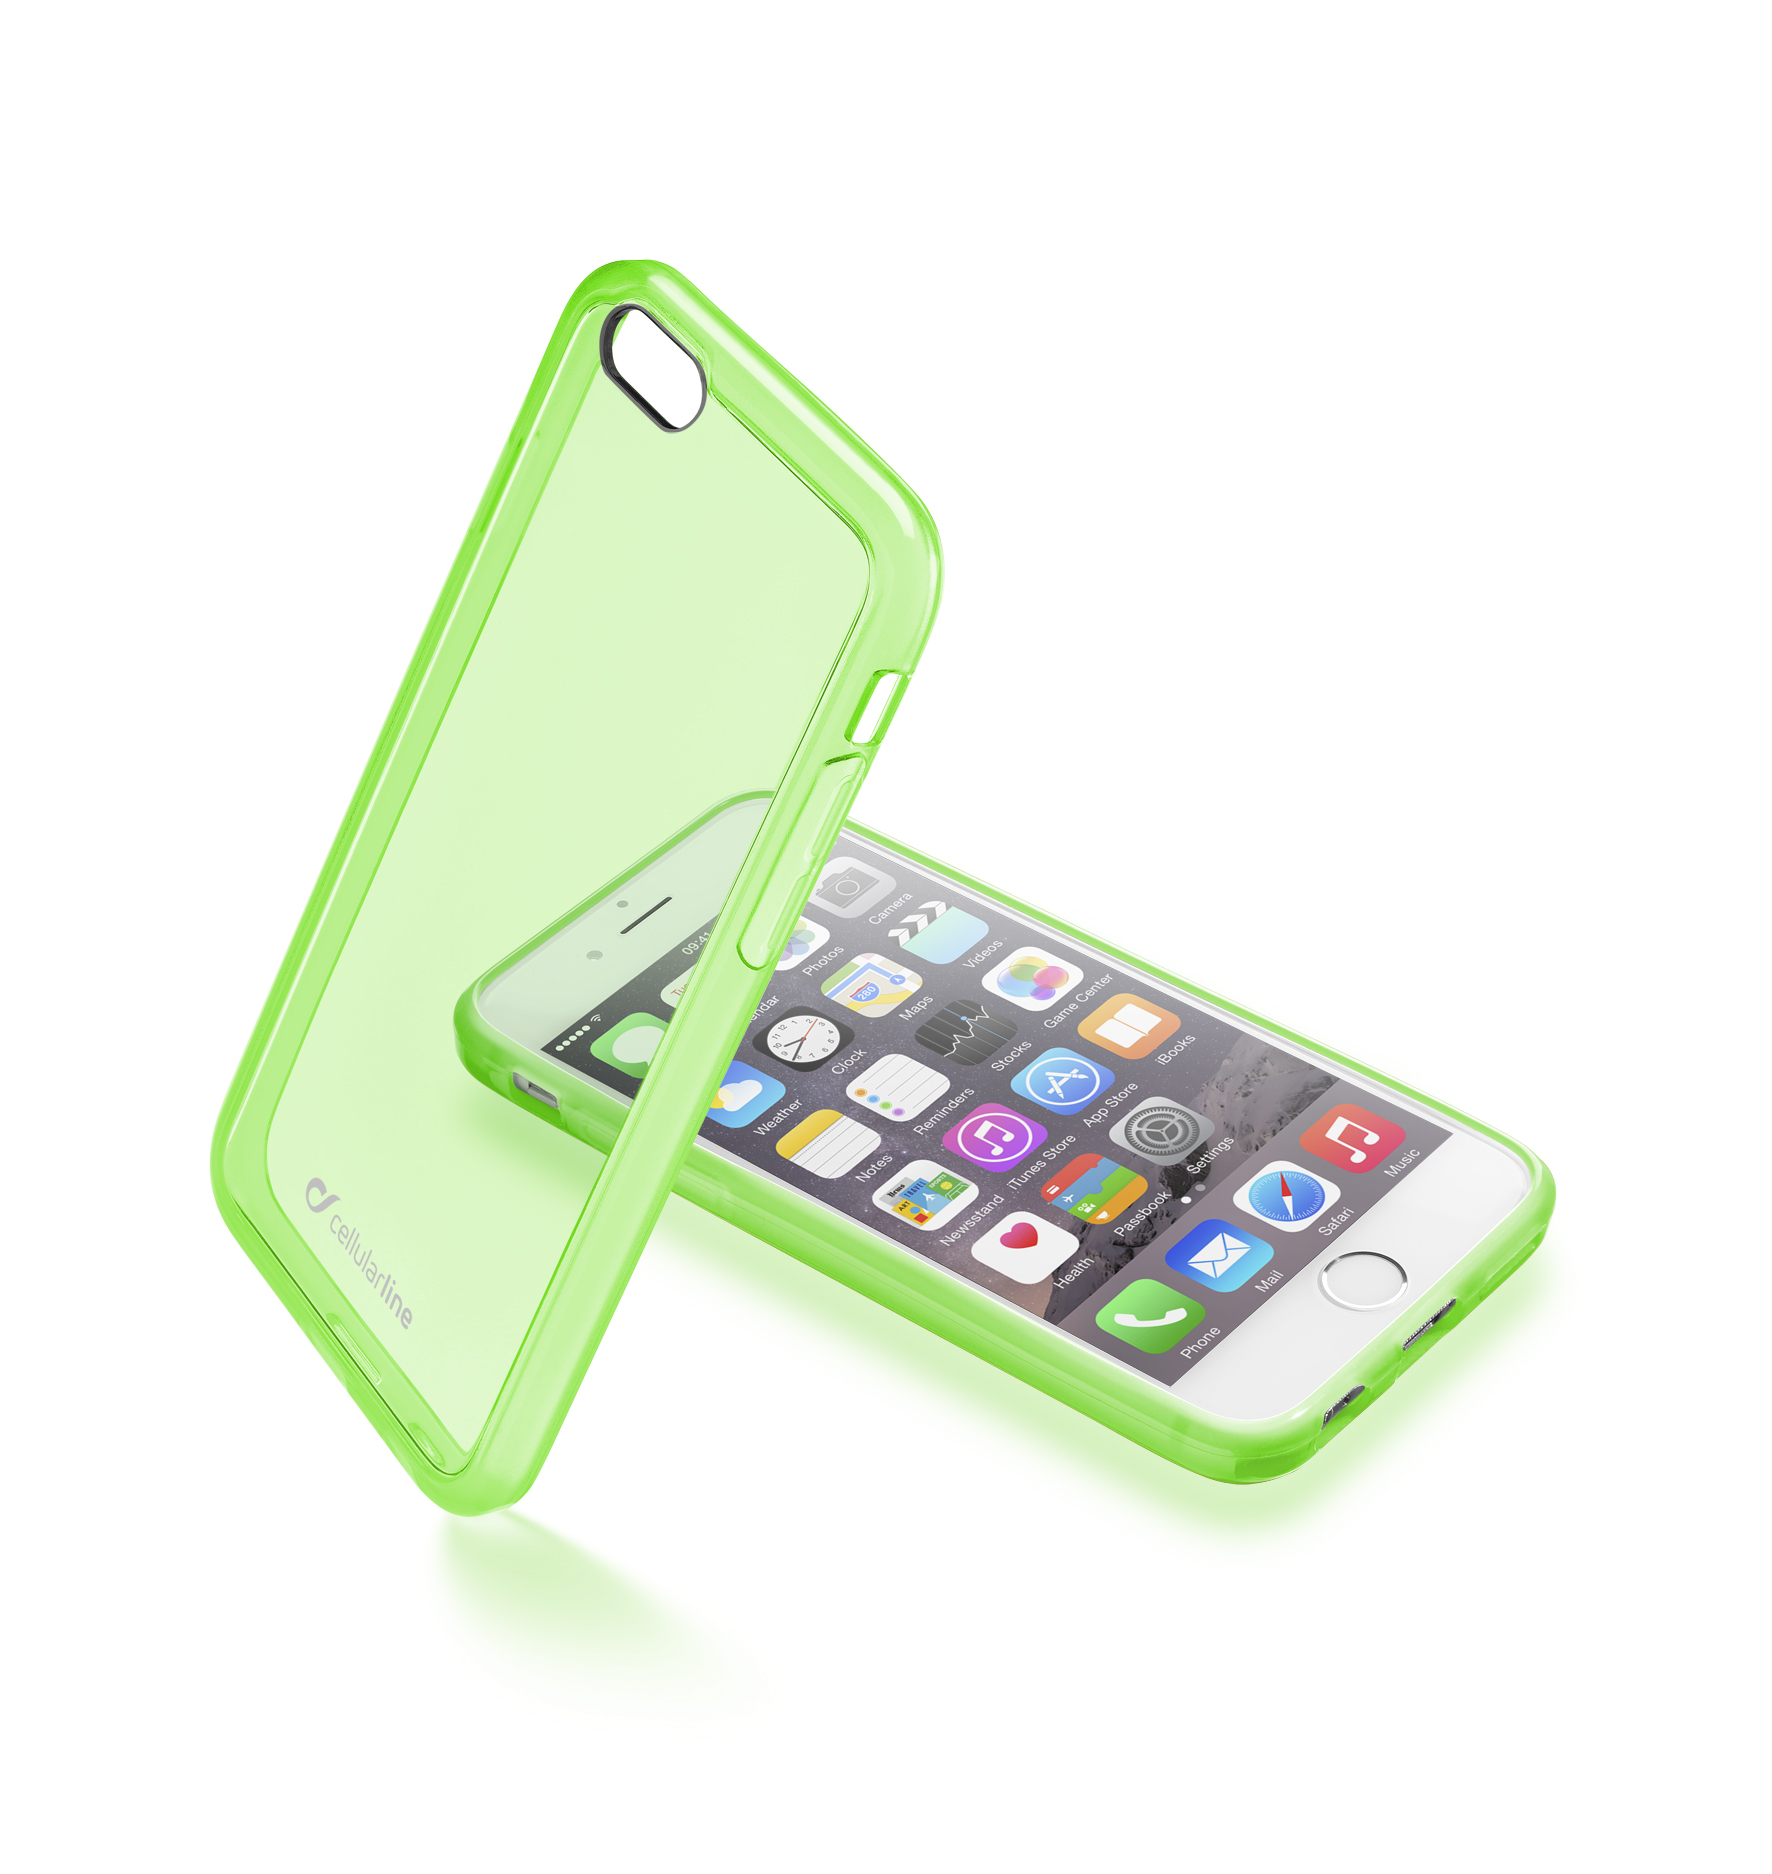 iPhone 6s/6, cover, clear color, green